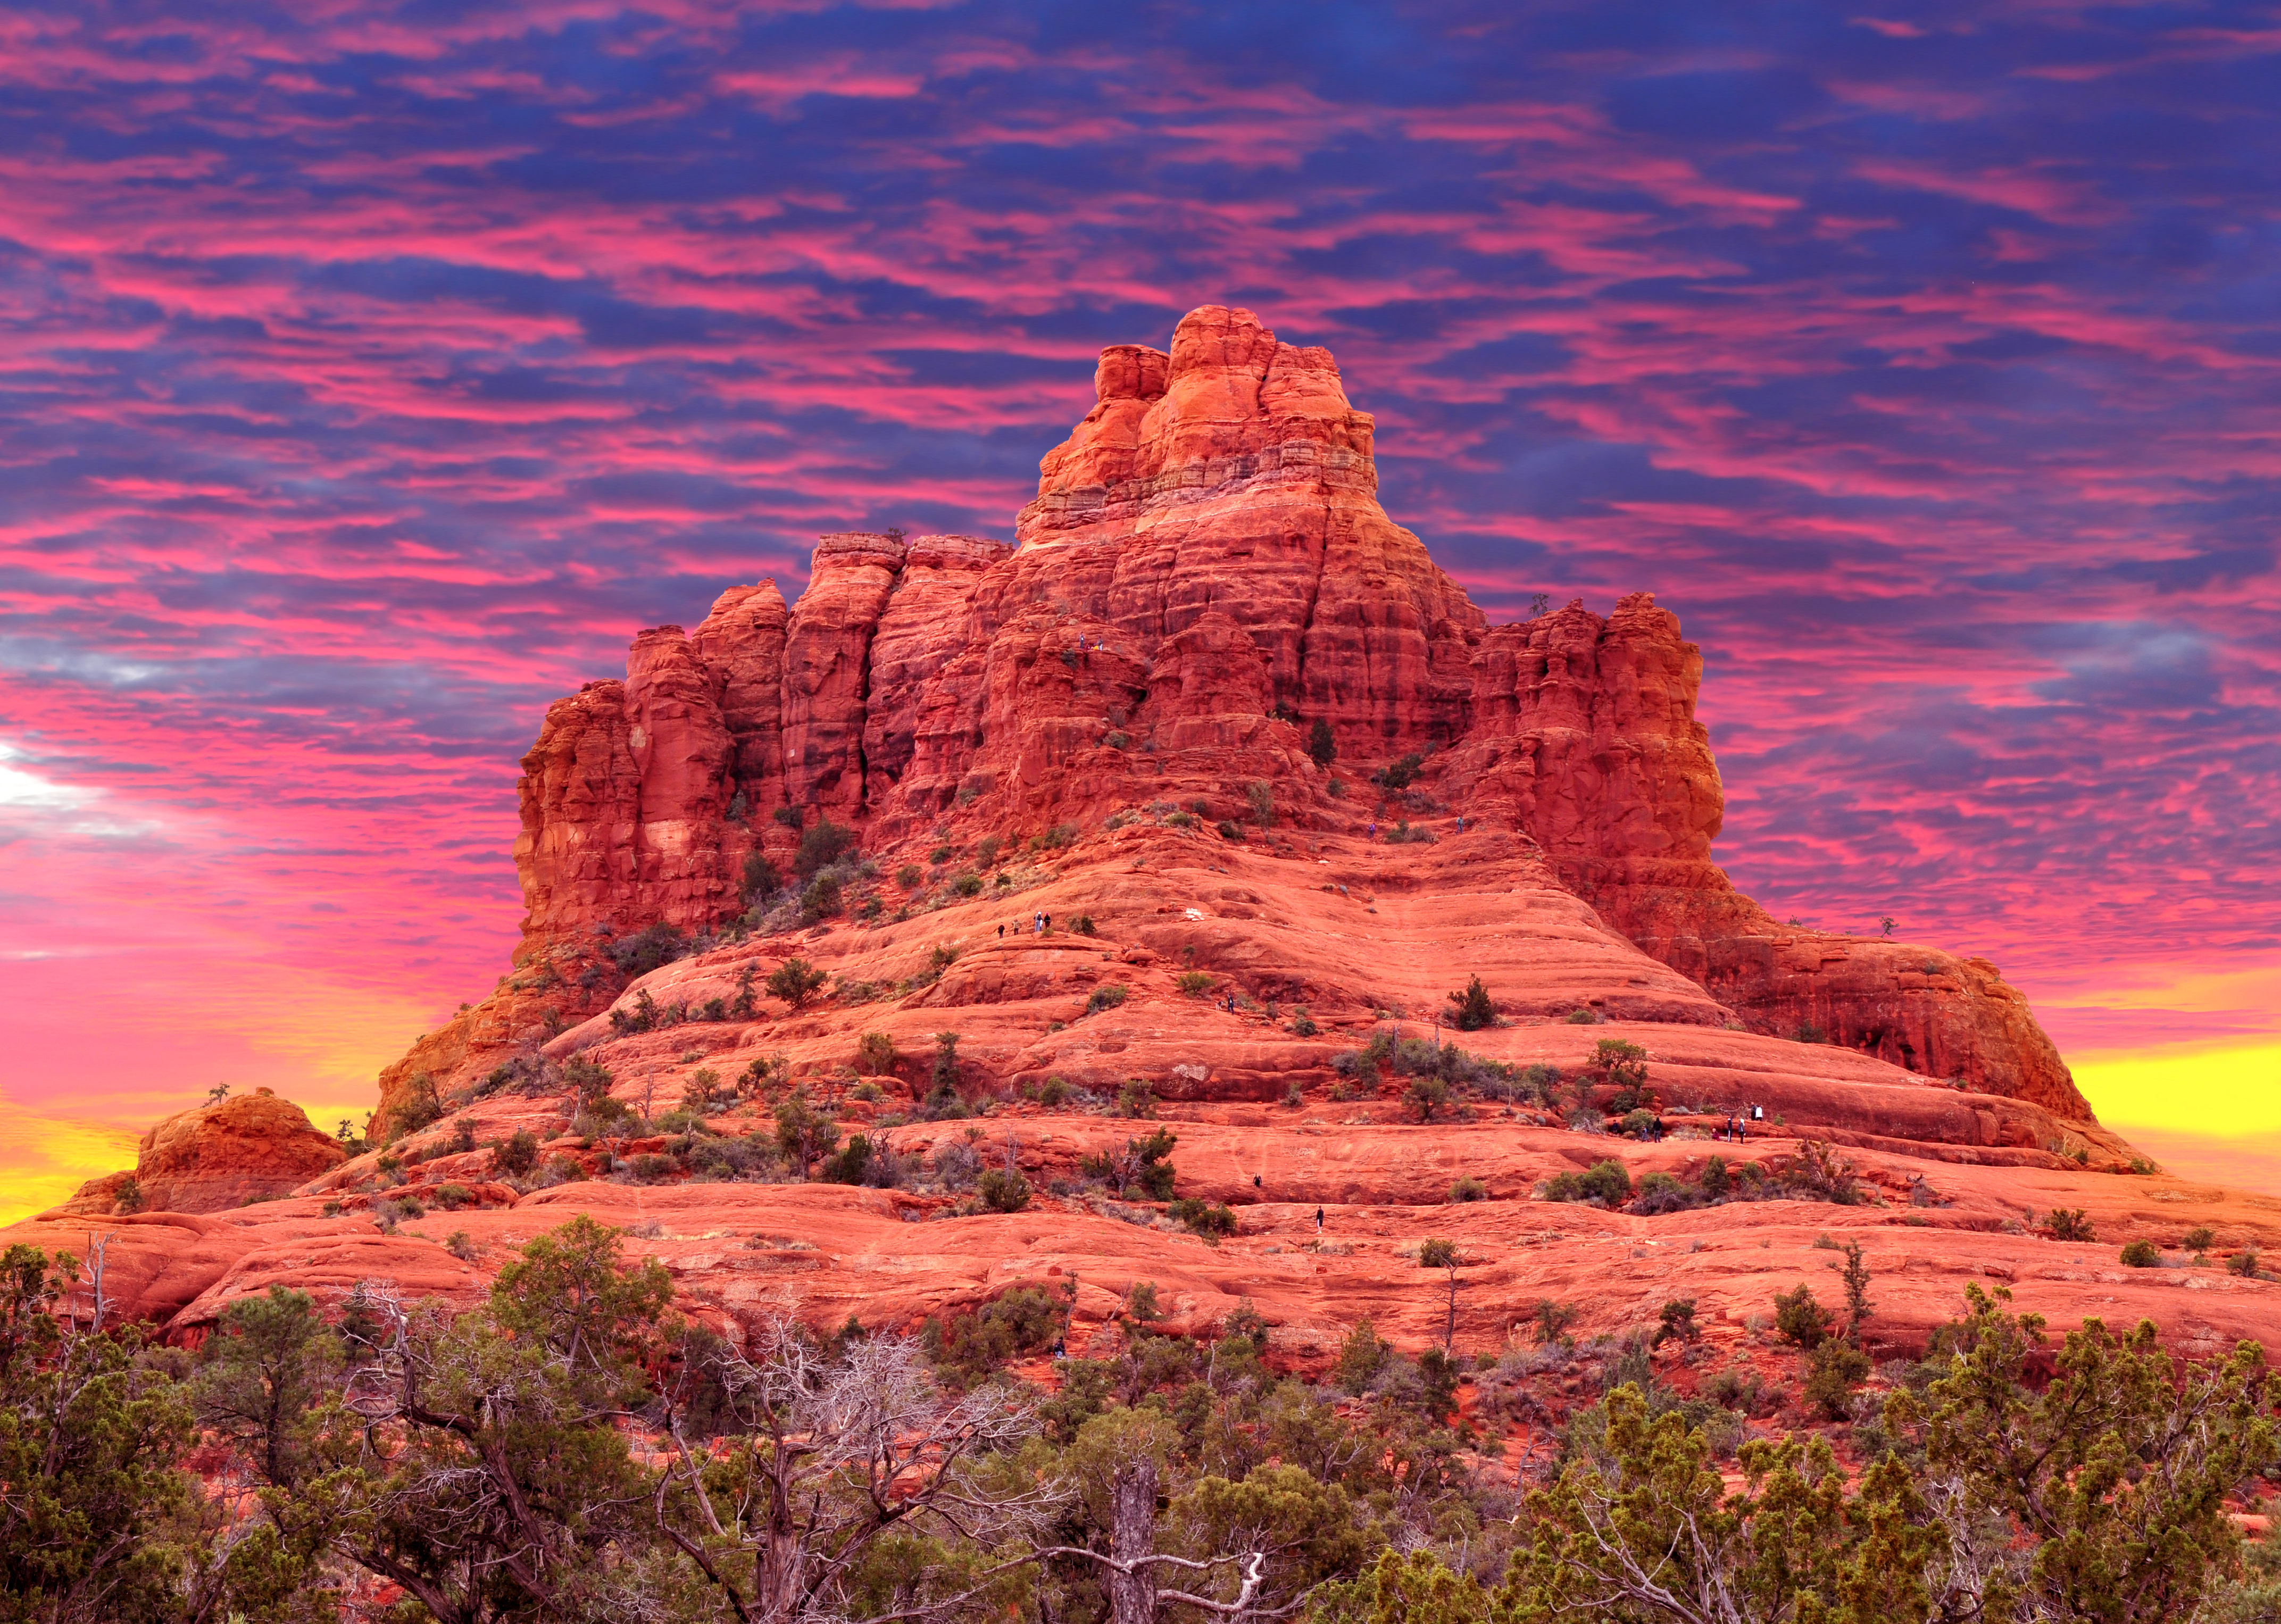 A stunning red rock formation at sunset